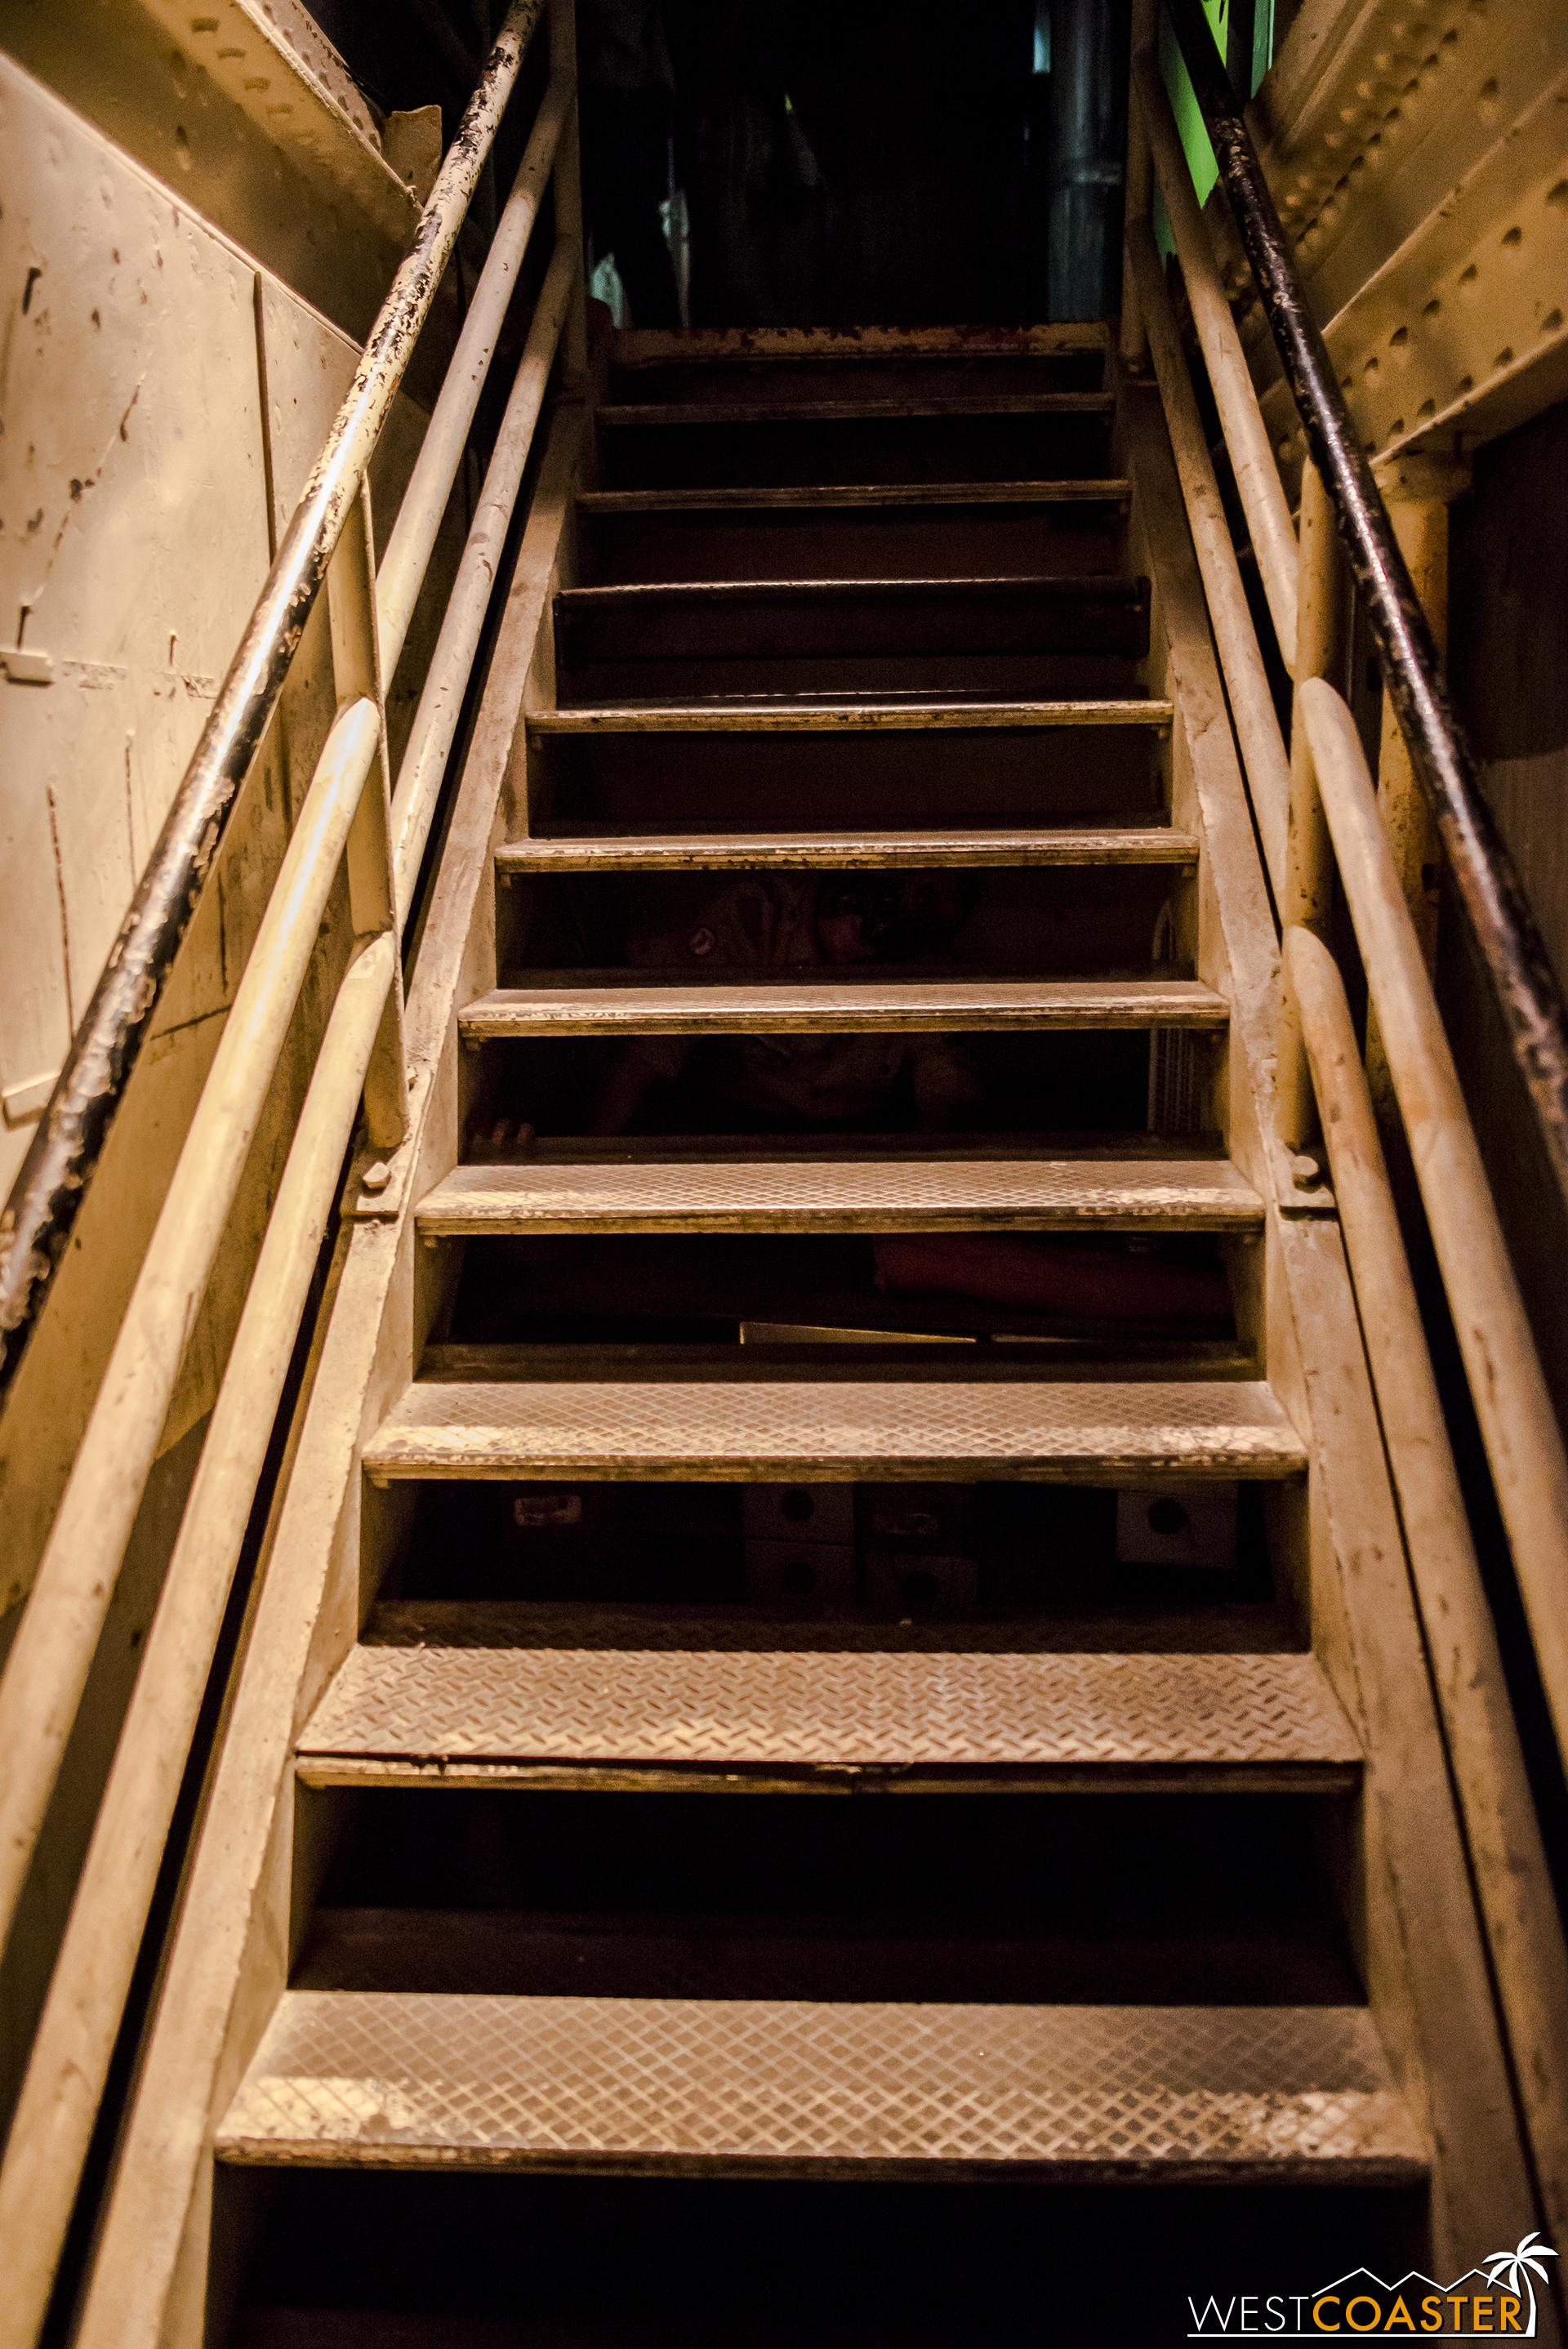  Up the spooky stairs, one of many in the ship mazes, which are not ADA friendly. 